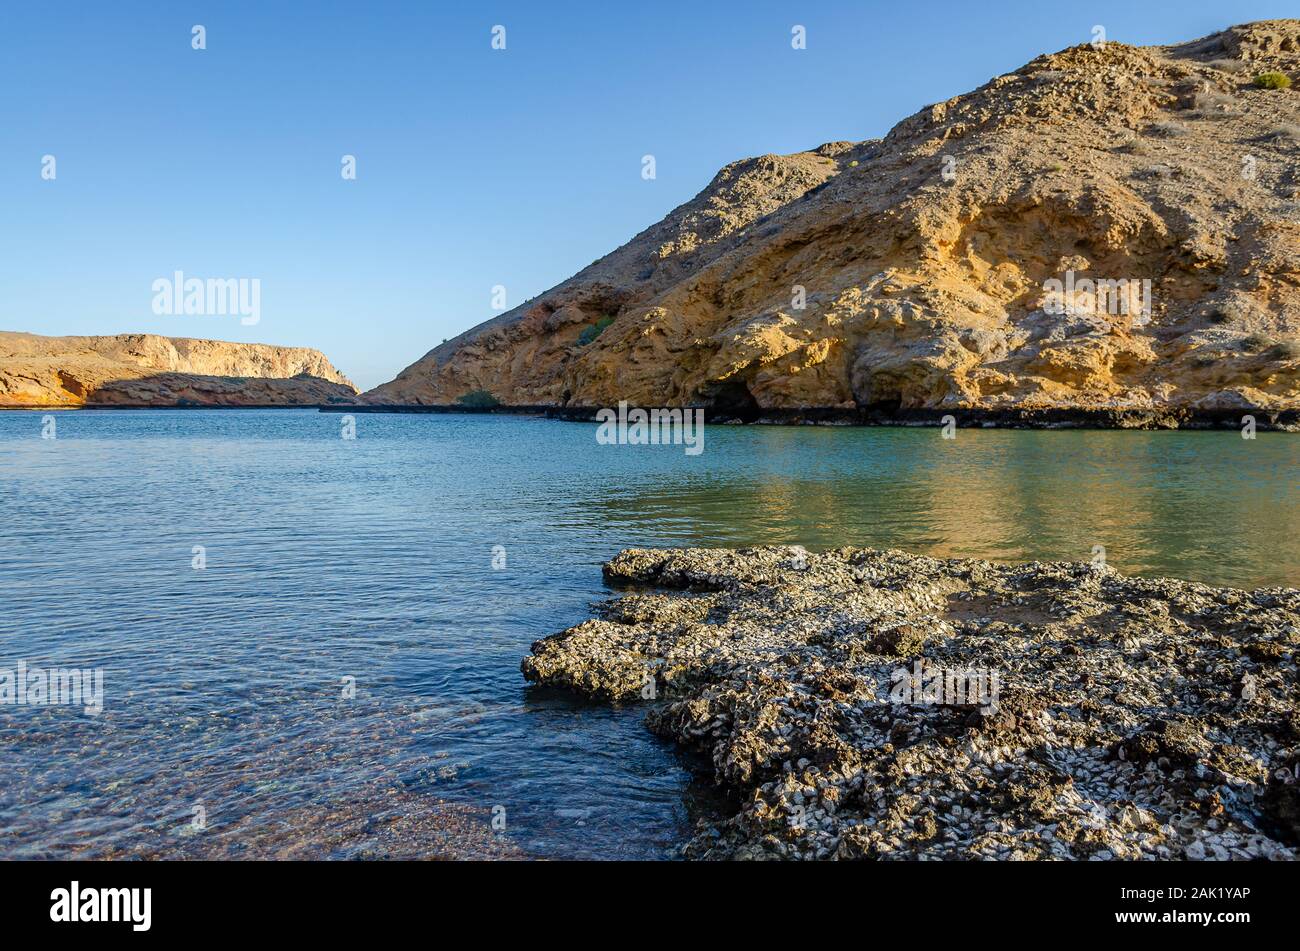 Mind refreshing view of a peaceful, rocky beach in Muscat, Oman. Ideal for meditation. Stock Photo